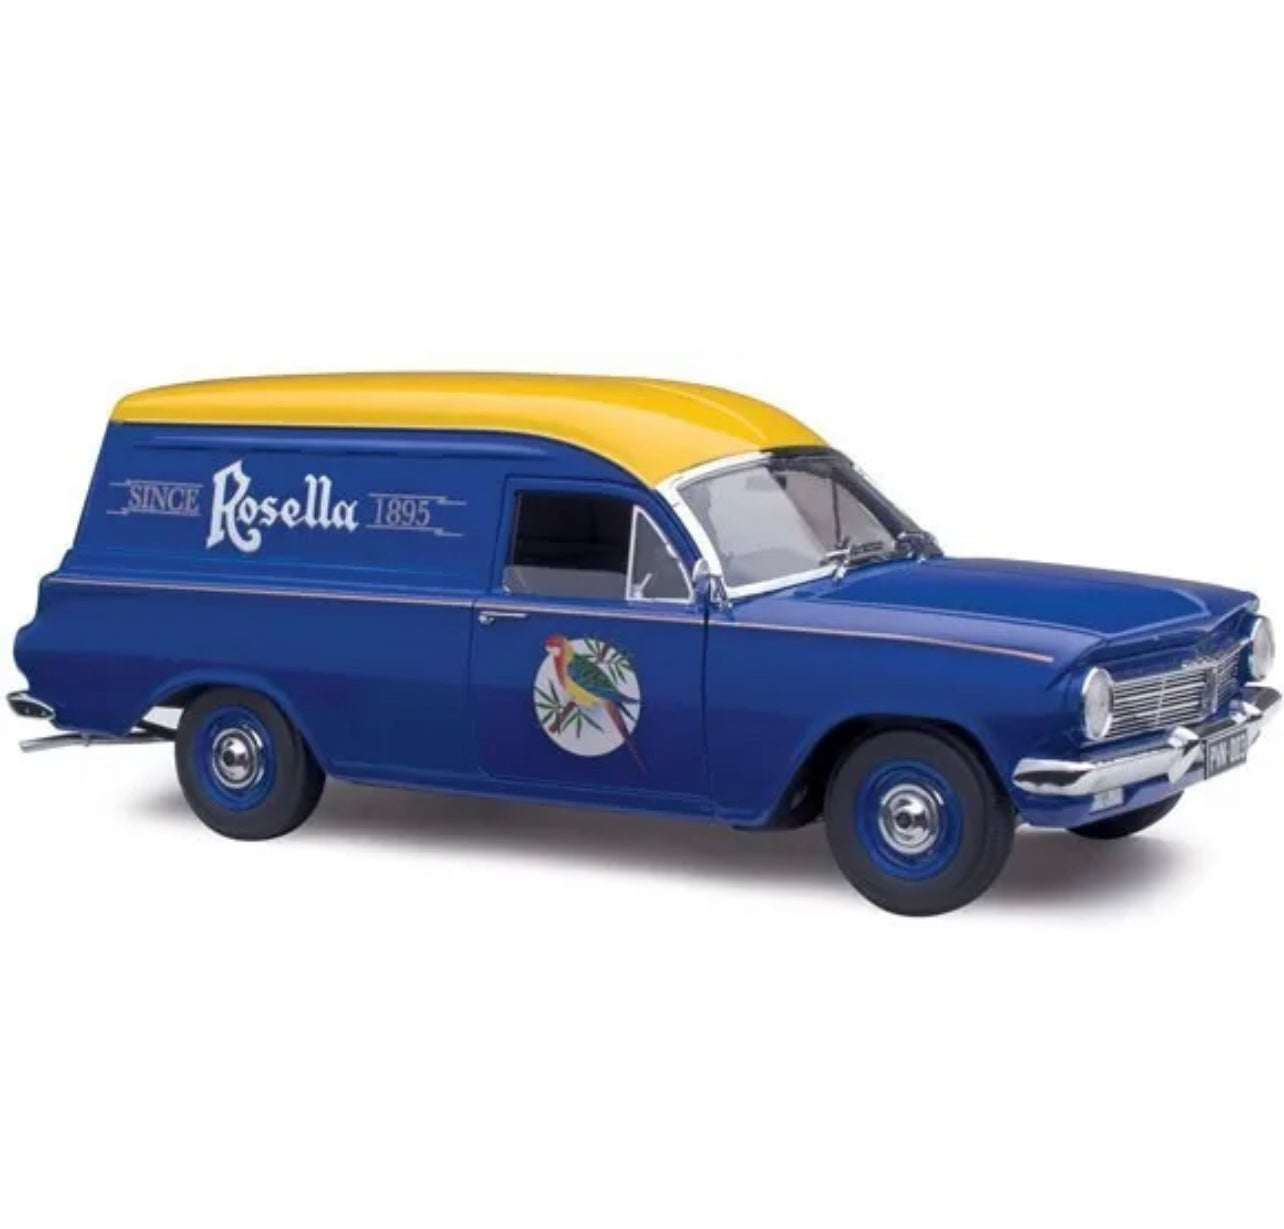 1:18 Holden EH Panel Van Rosella Classic Carlectables